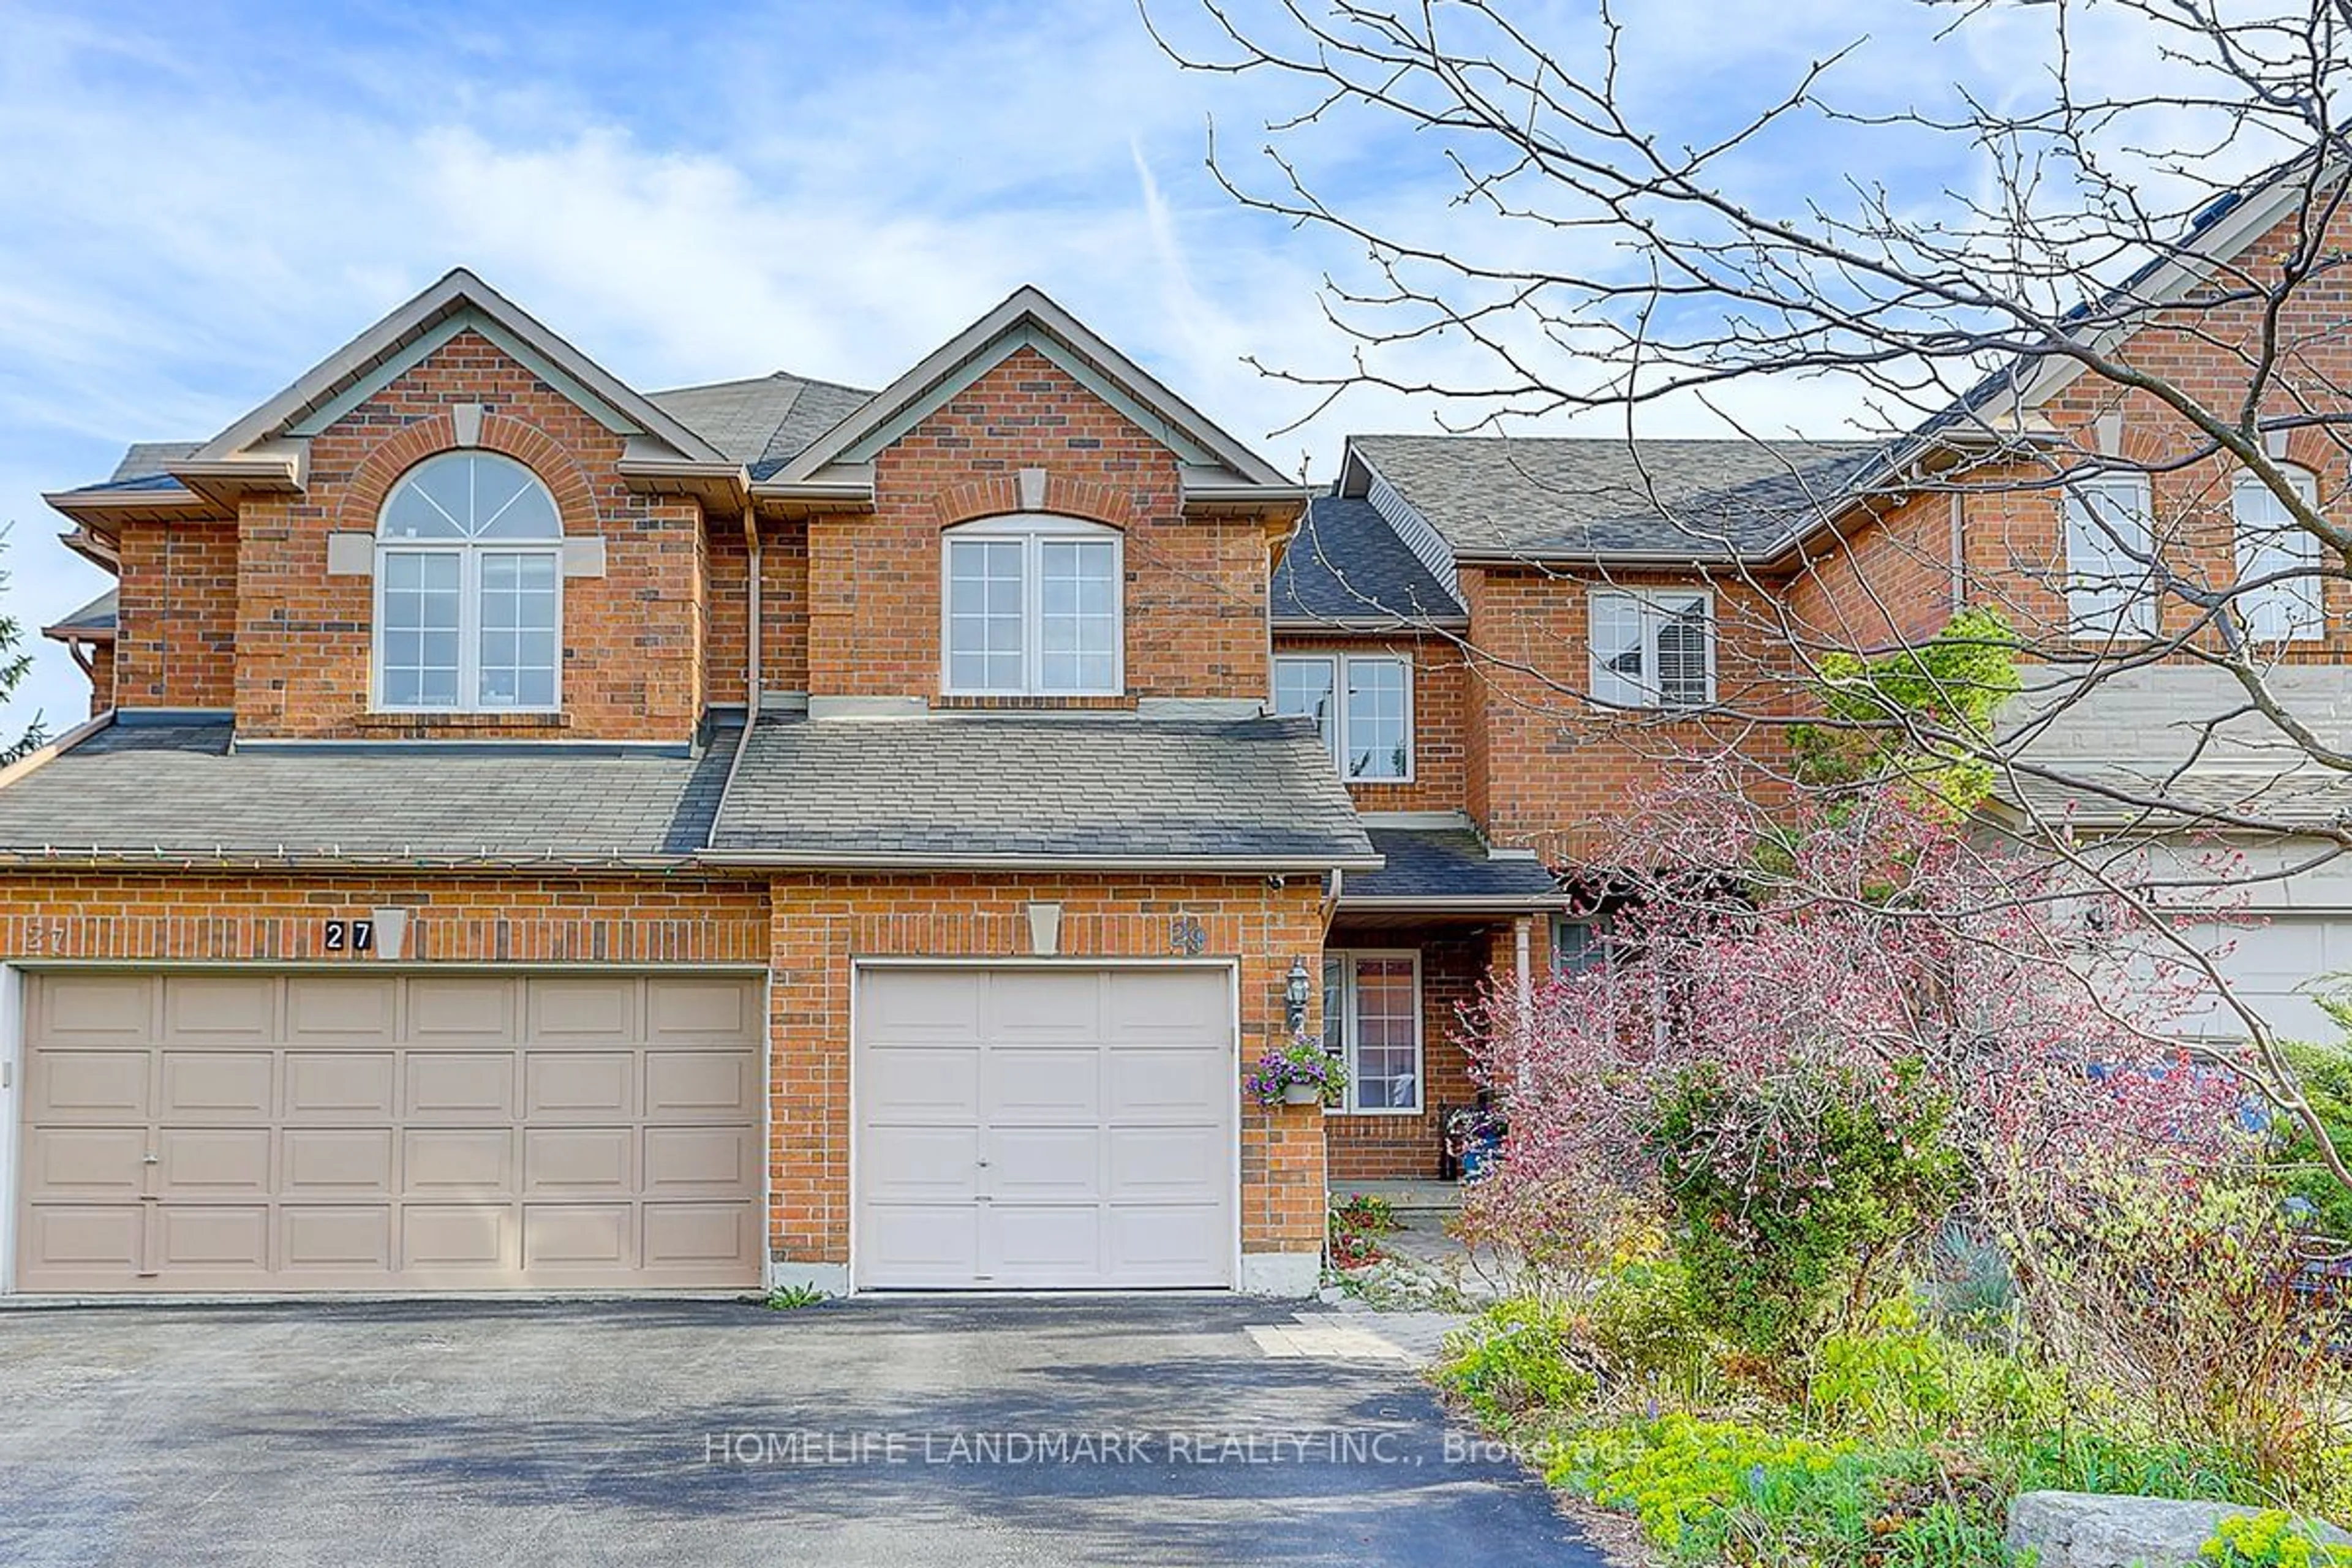 Home with brick exterior material for 29 Edgemont Crt, Richmond Hill Ontario L4S 2H8